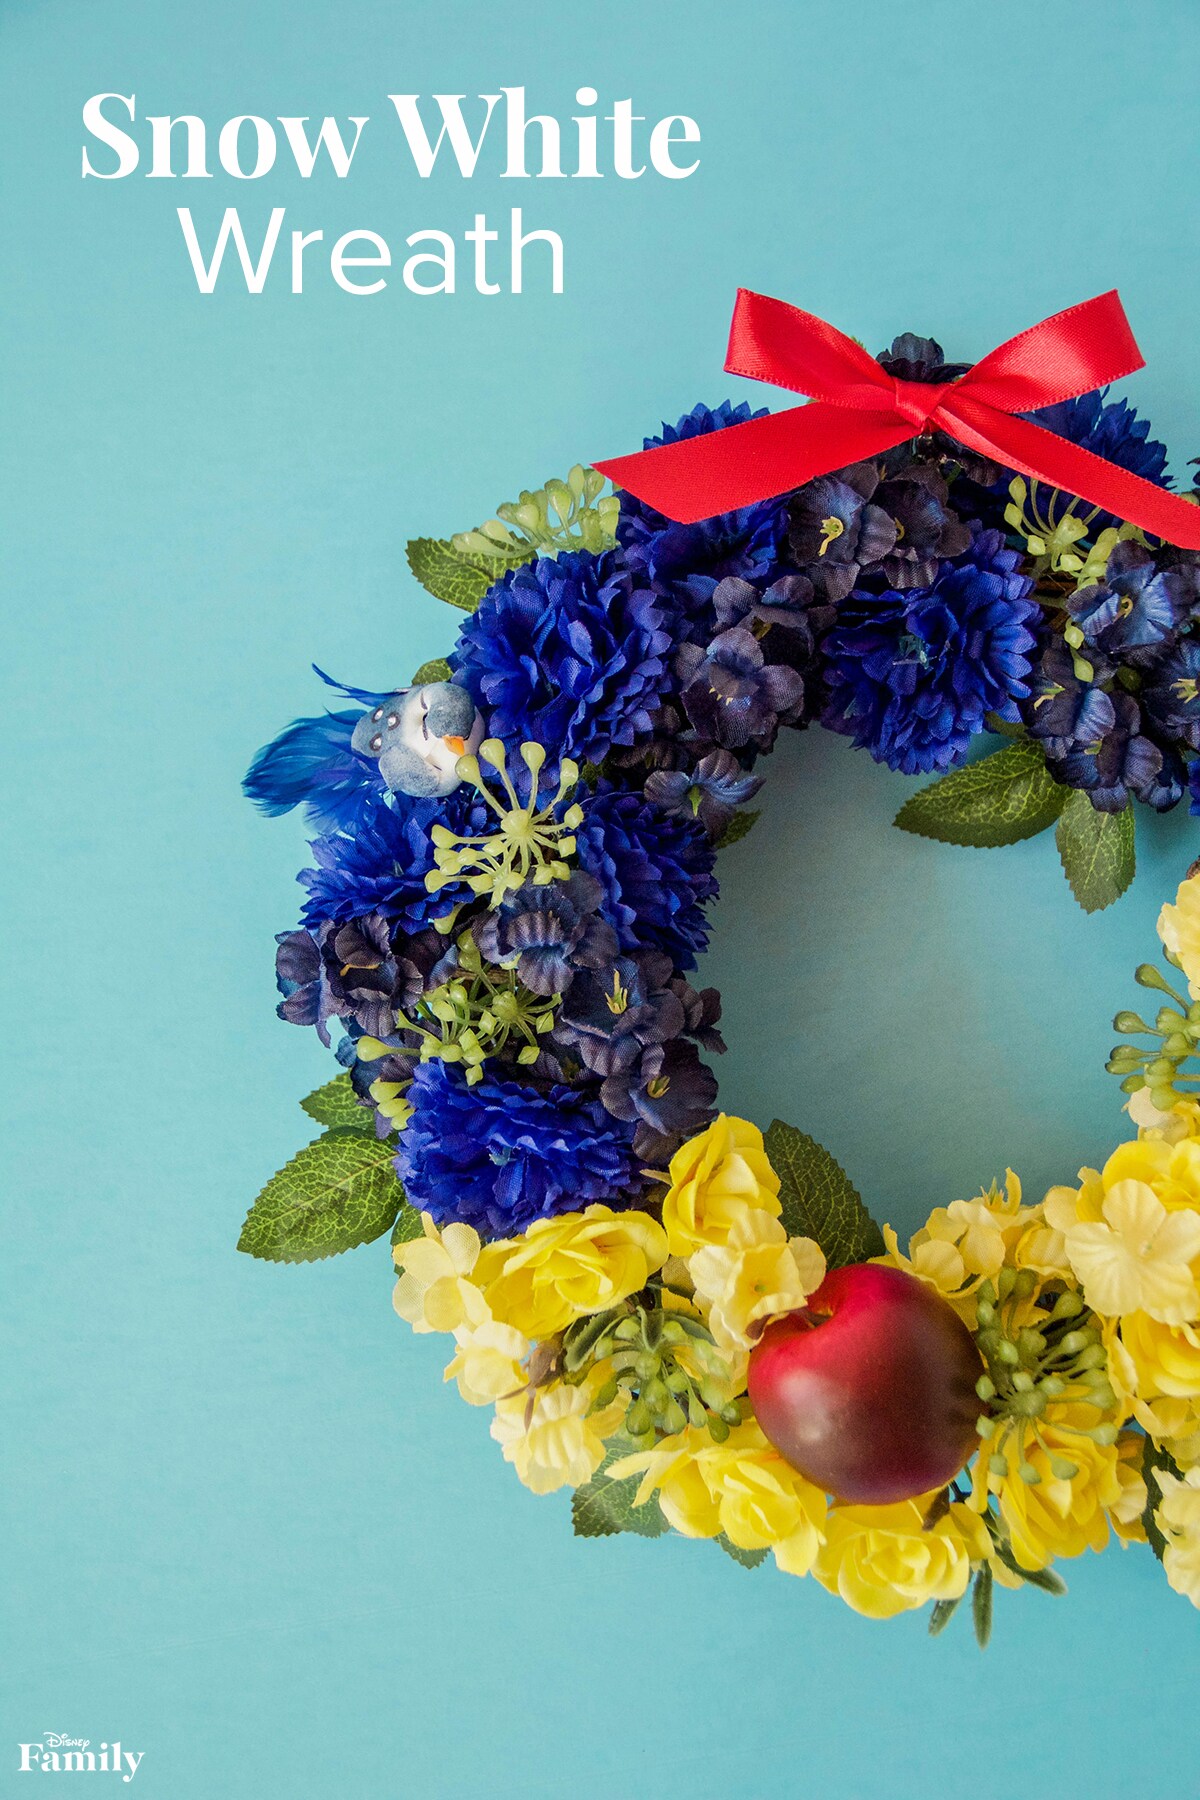 A Snow White themed wreath with blue and yellow flowers, a red bow, and a red apple.